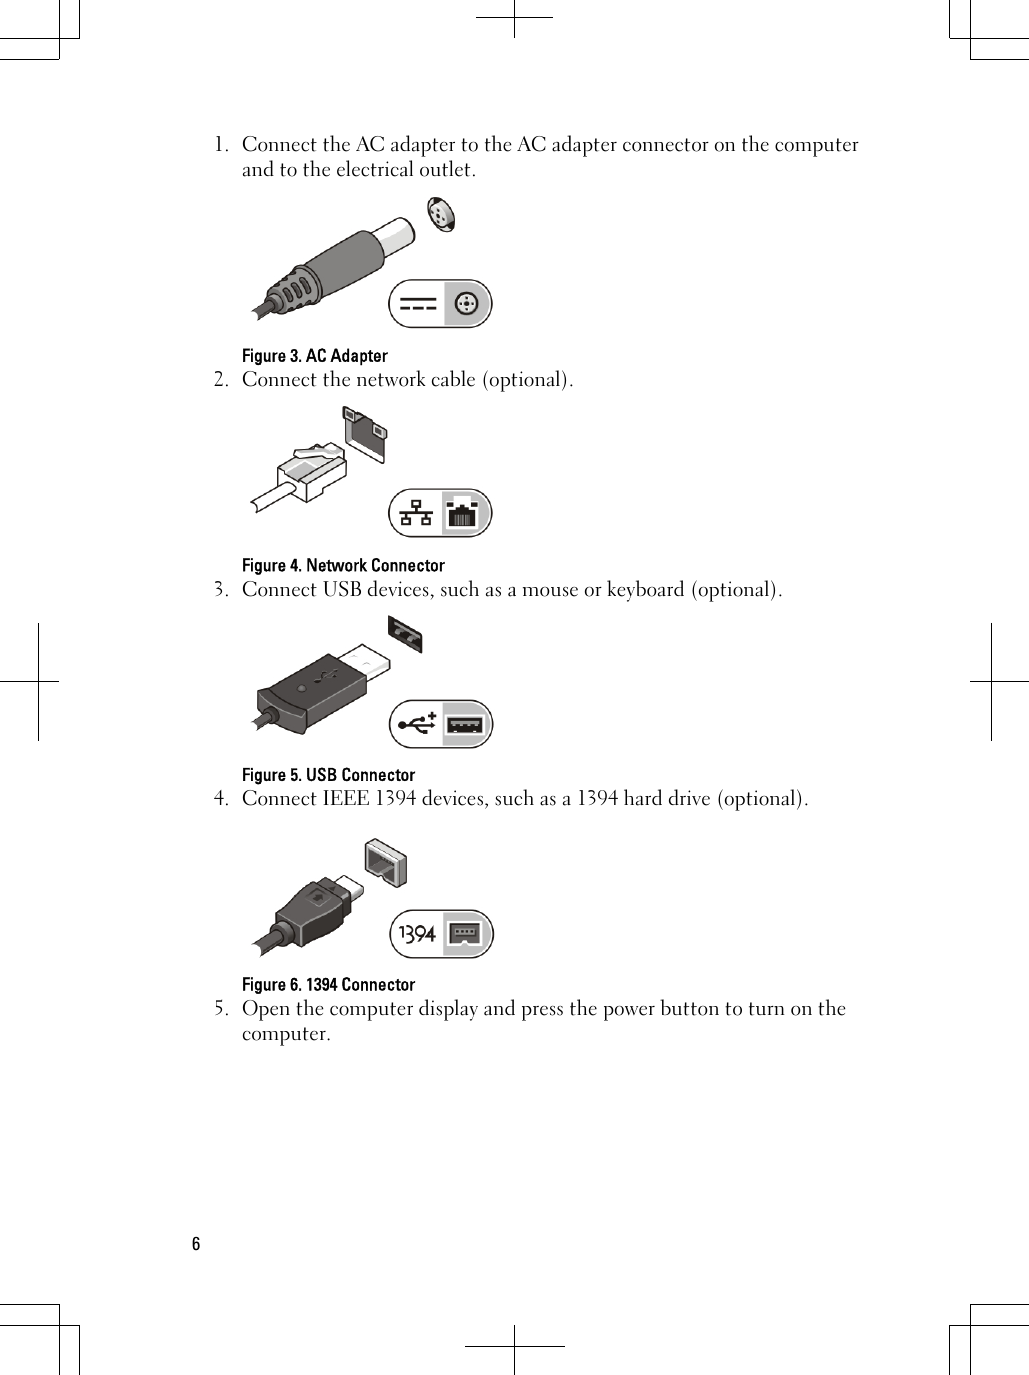 1. Connect the AC adapter to the AC adapter connector on the computerand to the electrical outlet.Figure 3. AC Adapter2. Connect the network cable (optional).Figure 4. Network Connector3. Connect USB devices, such as a mouse or keyboard (optional).Figure 5. USB Connector4. Connect IEEE 1394 devices, such as a 1394 hard drive (optional).Figure 6. 1394 Connector5. Open the computer display and press the power button to turn on thecomputer.6